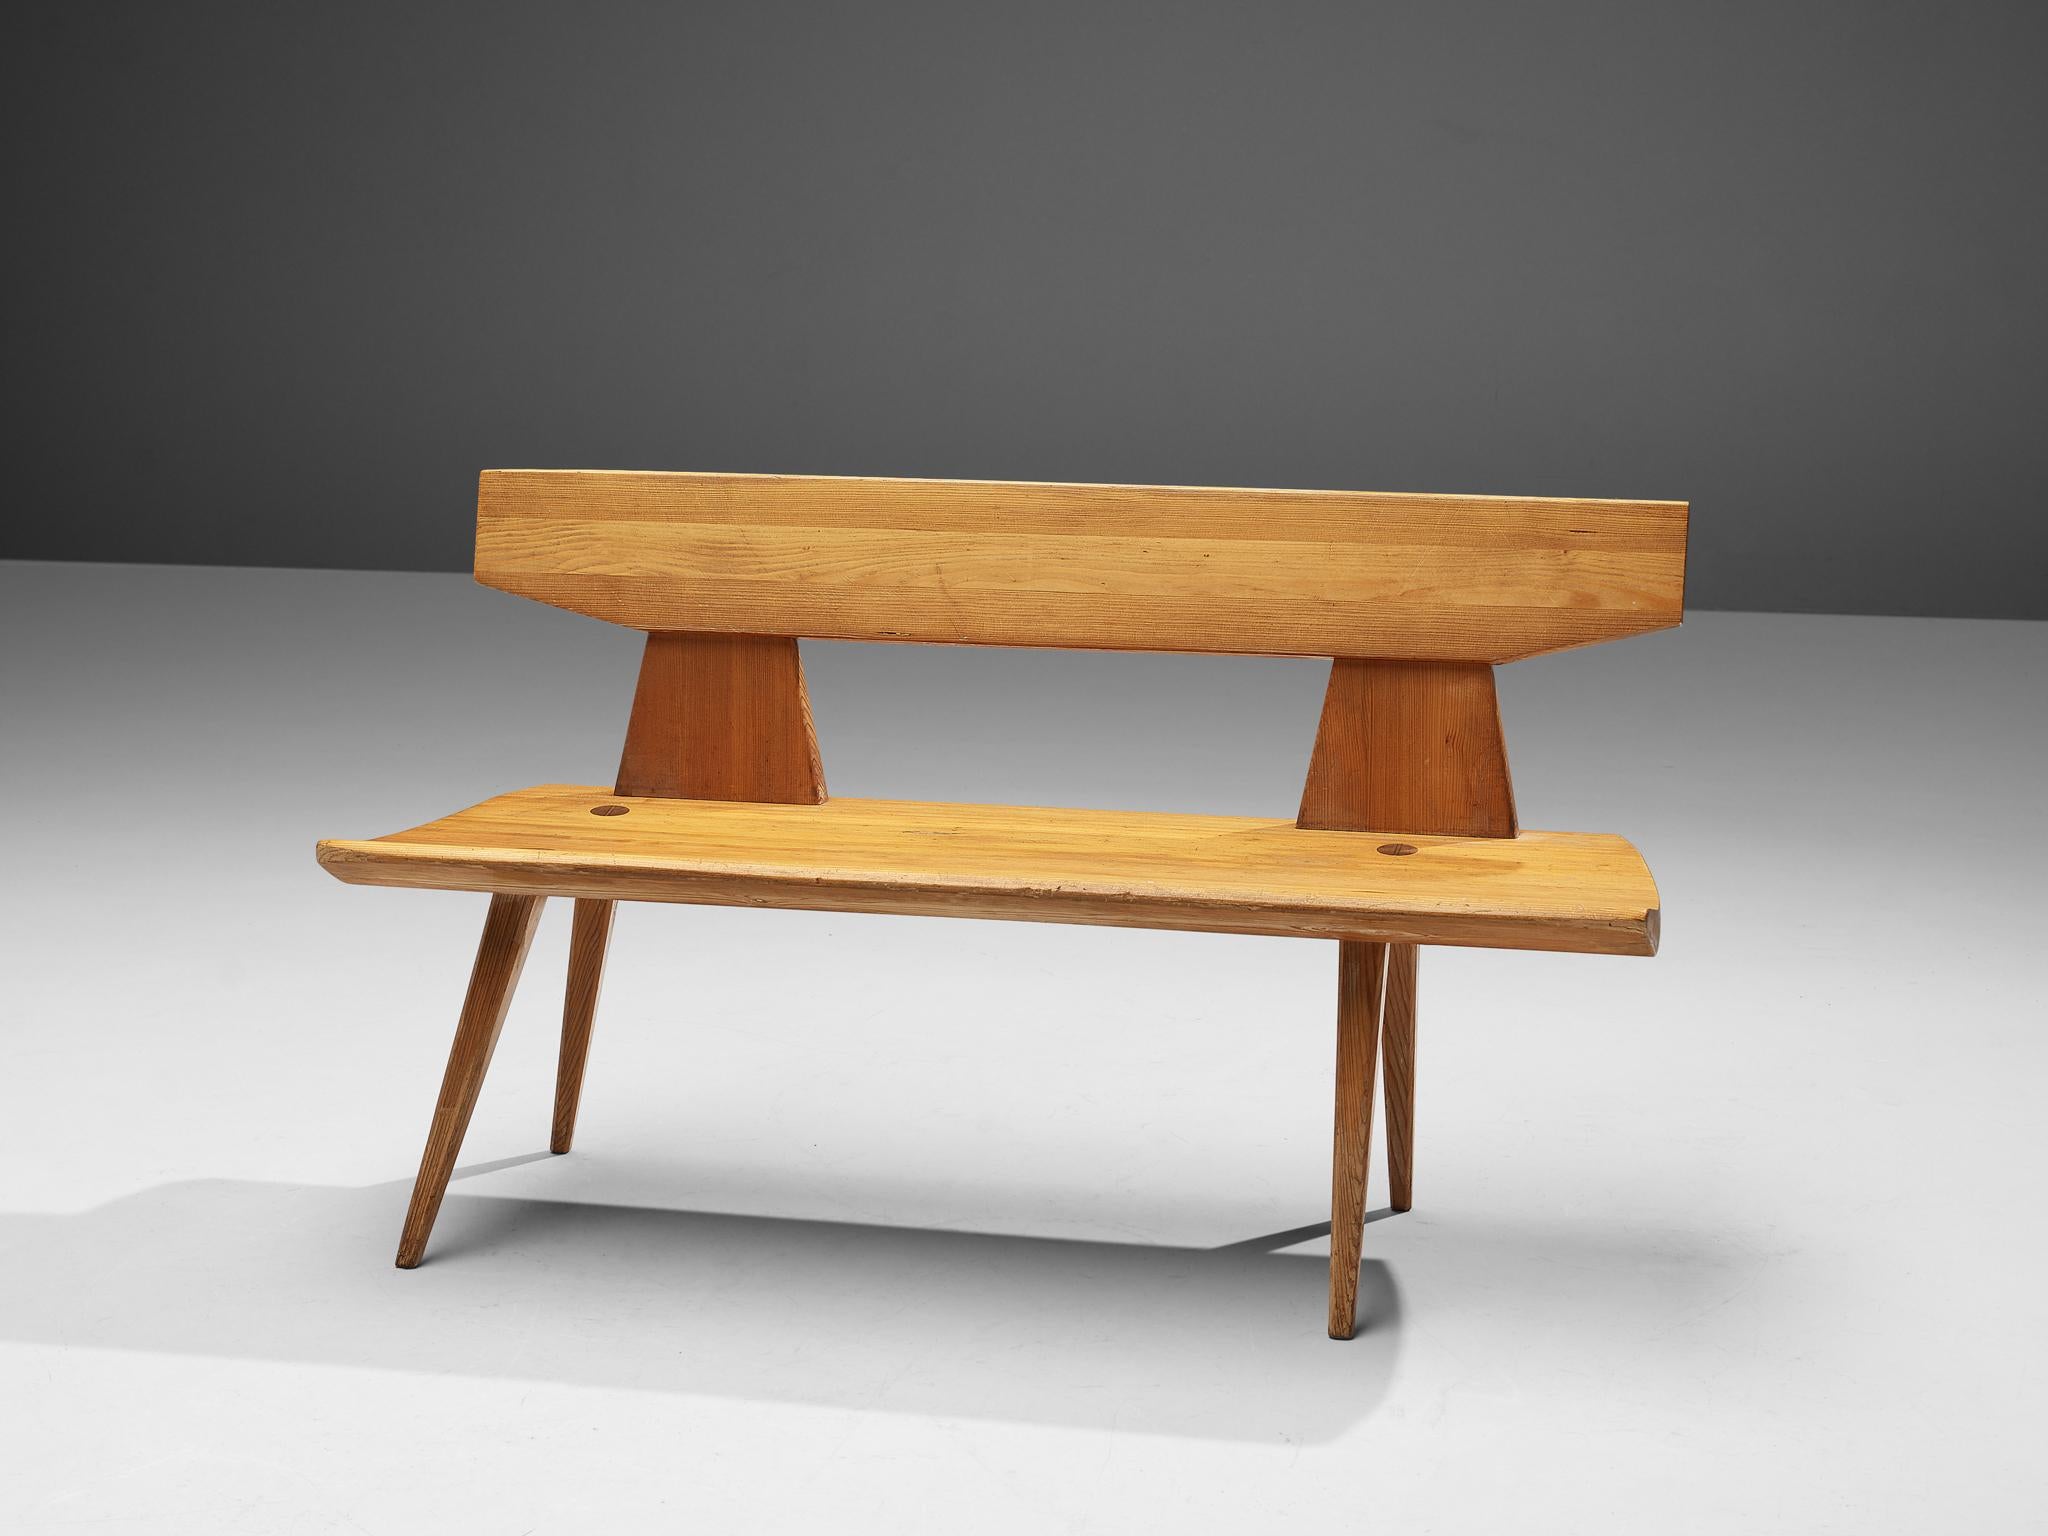 Jacob Kielland-Brandt, bench, pine, Denmark, 1960s

This wooden bench is designed by Jacob Kielland Brandt. This piece features tapered and tilted legs that go 'through' the seat, showing the wooden connection on top. Interesting detail is the way